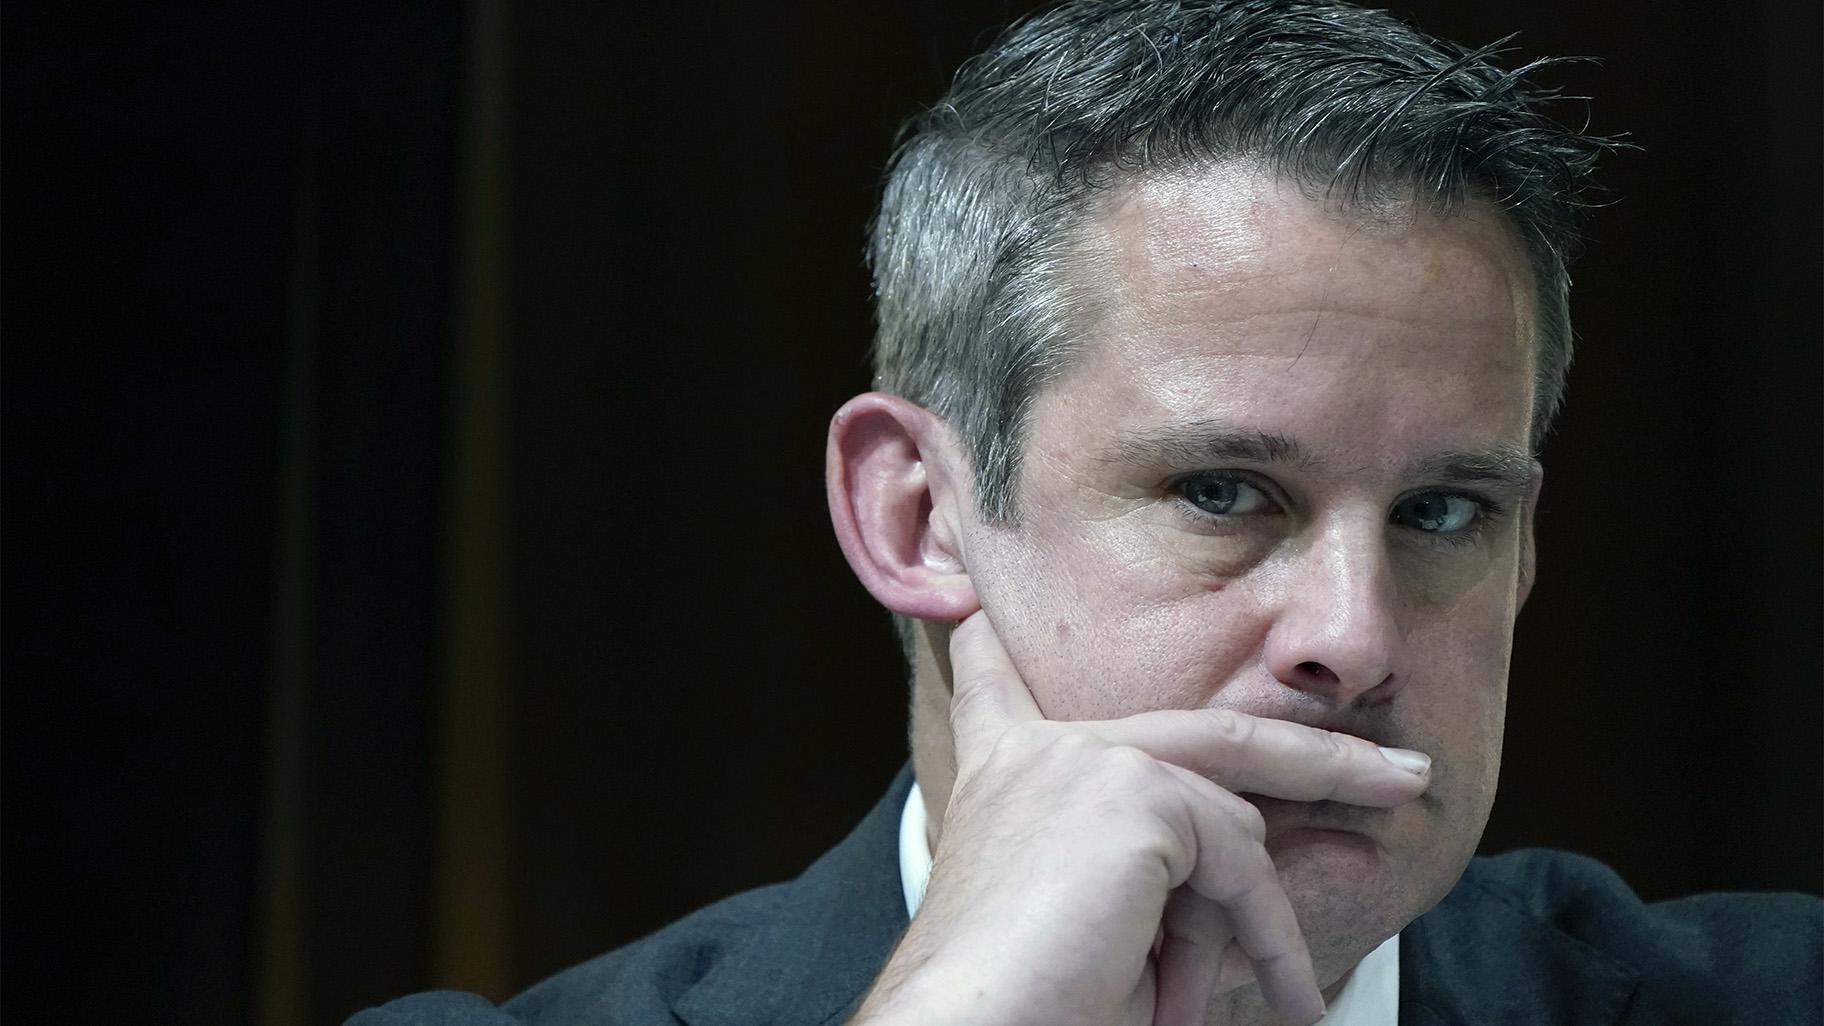 Rep. Adam Kinzinger, R-Ill., listens as the House select committee investigating the Jan. 6 attack on the U.S. Capitol holds a hearing at the Capitol in Washington, Tuesday, July 12, 2022.  (AP Photo / Jacquelyn Martin, File)